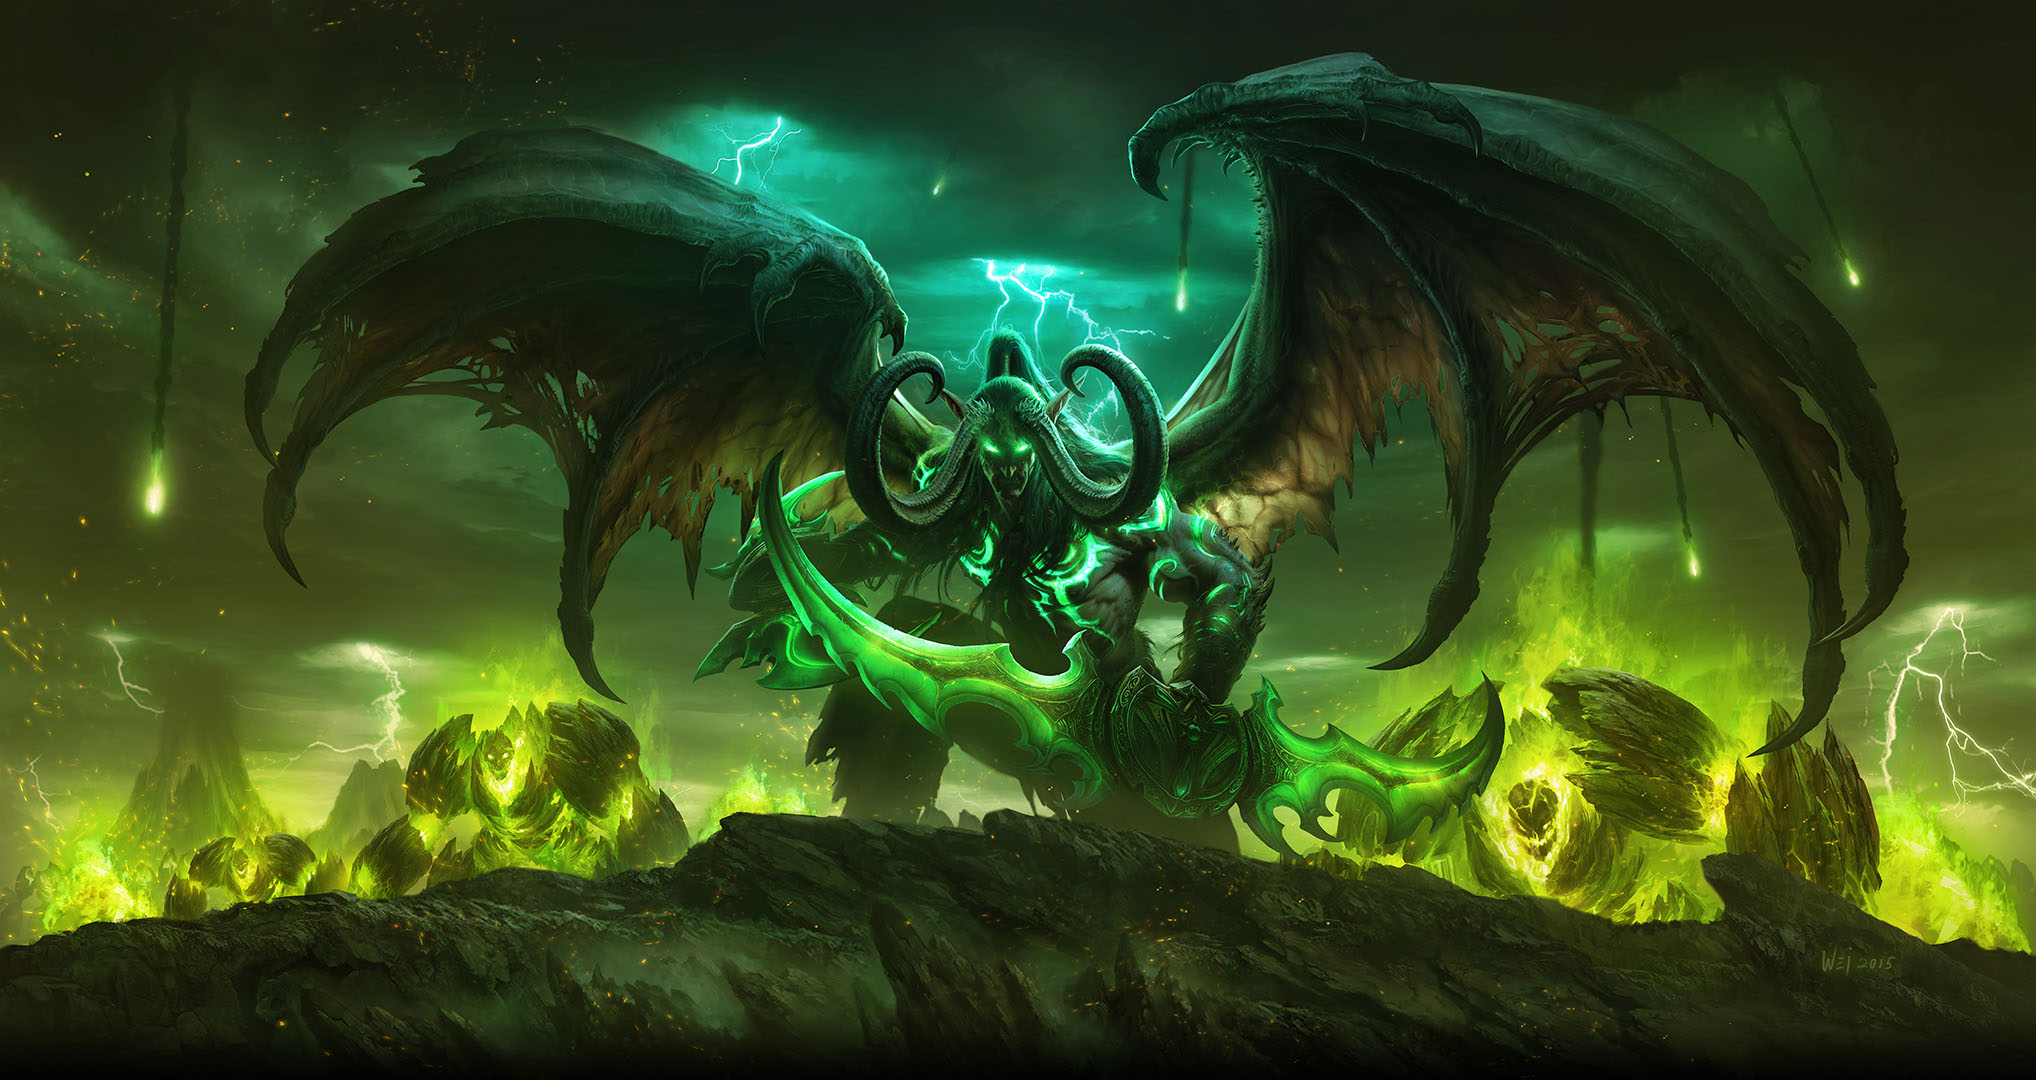 Illidan Stormrage — a Night Elf/Demon hybrid with giant bat wings and horns — poses on a green rock with his warglaives in the box art for the World of Warcraft: Legion expansion